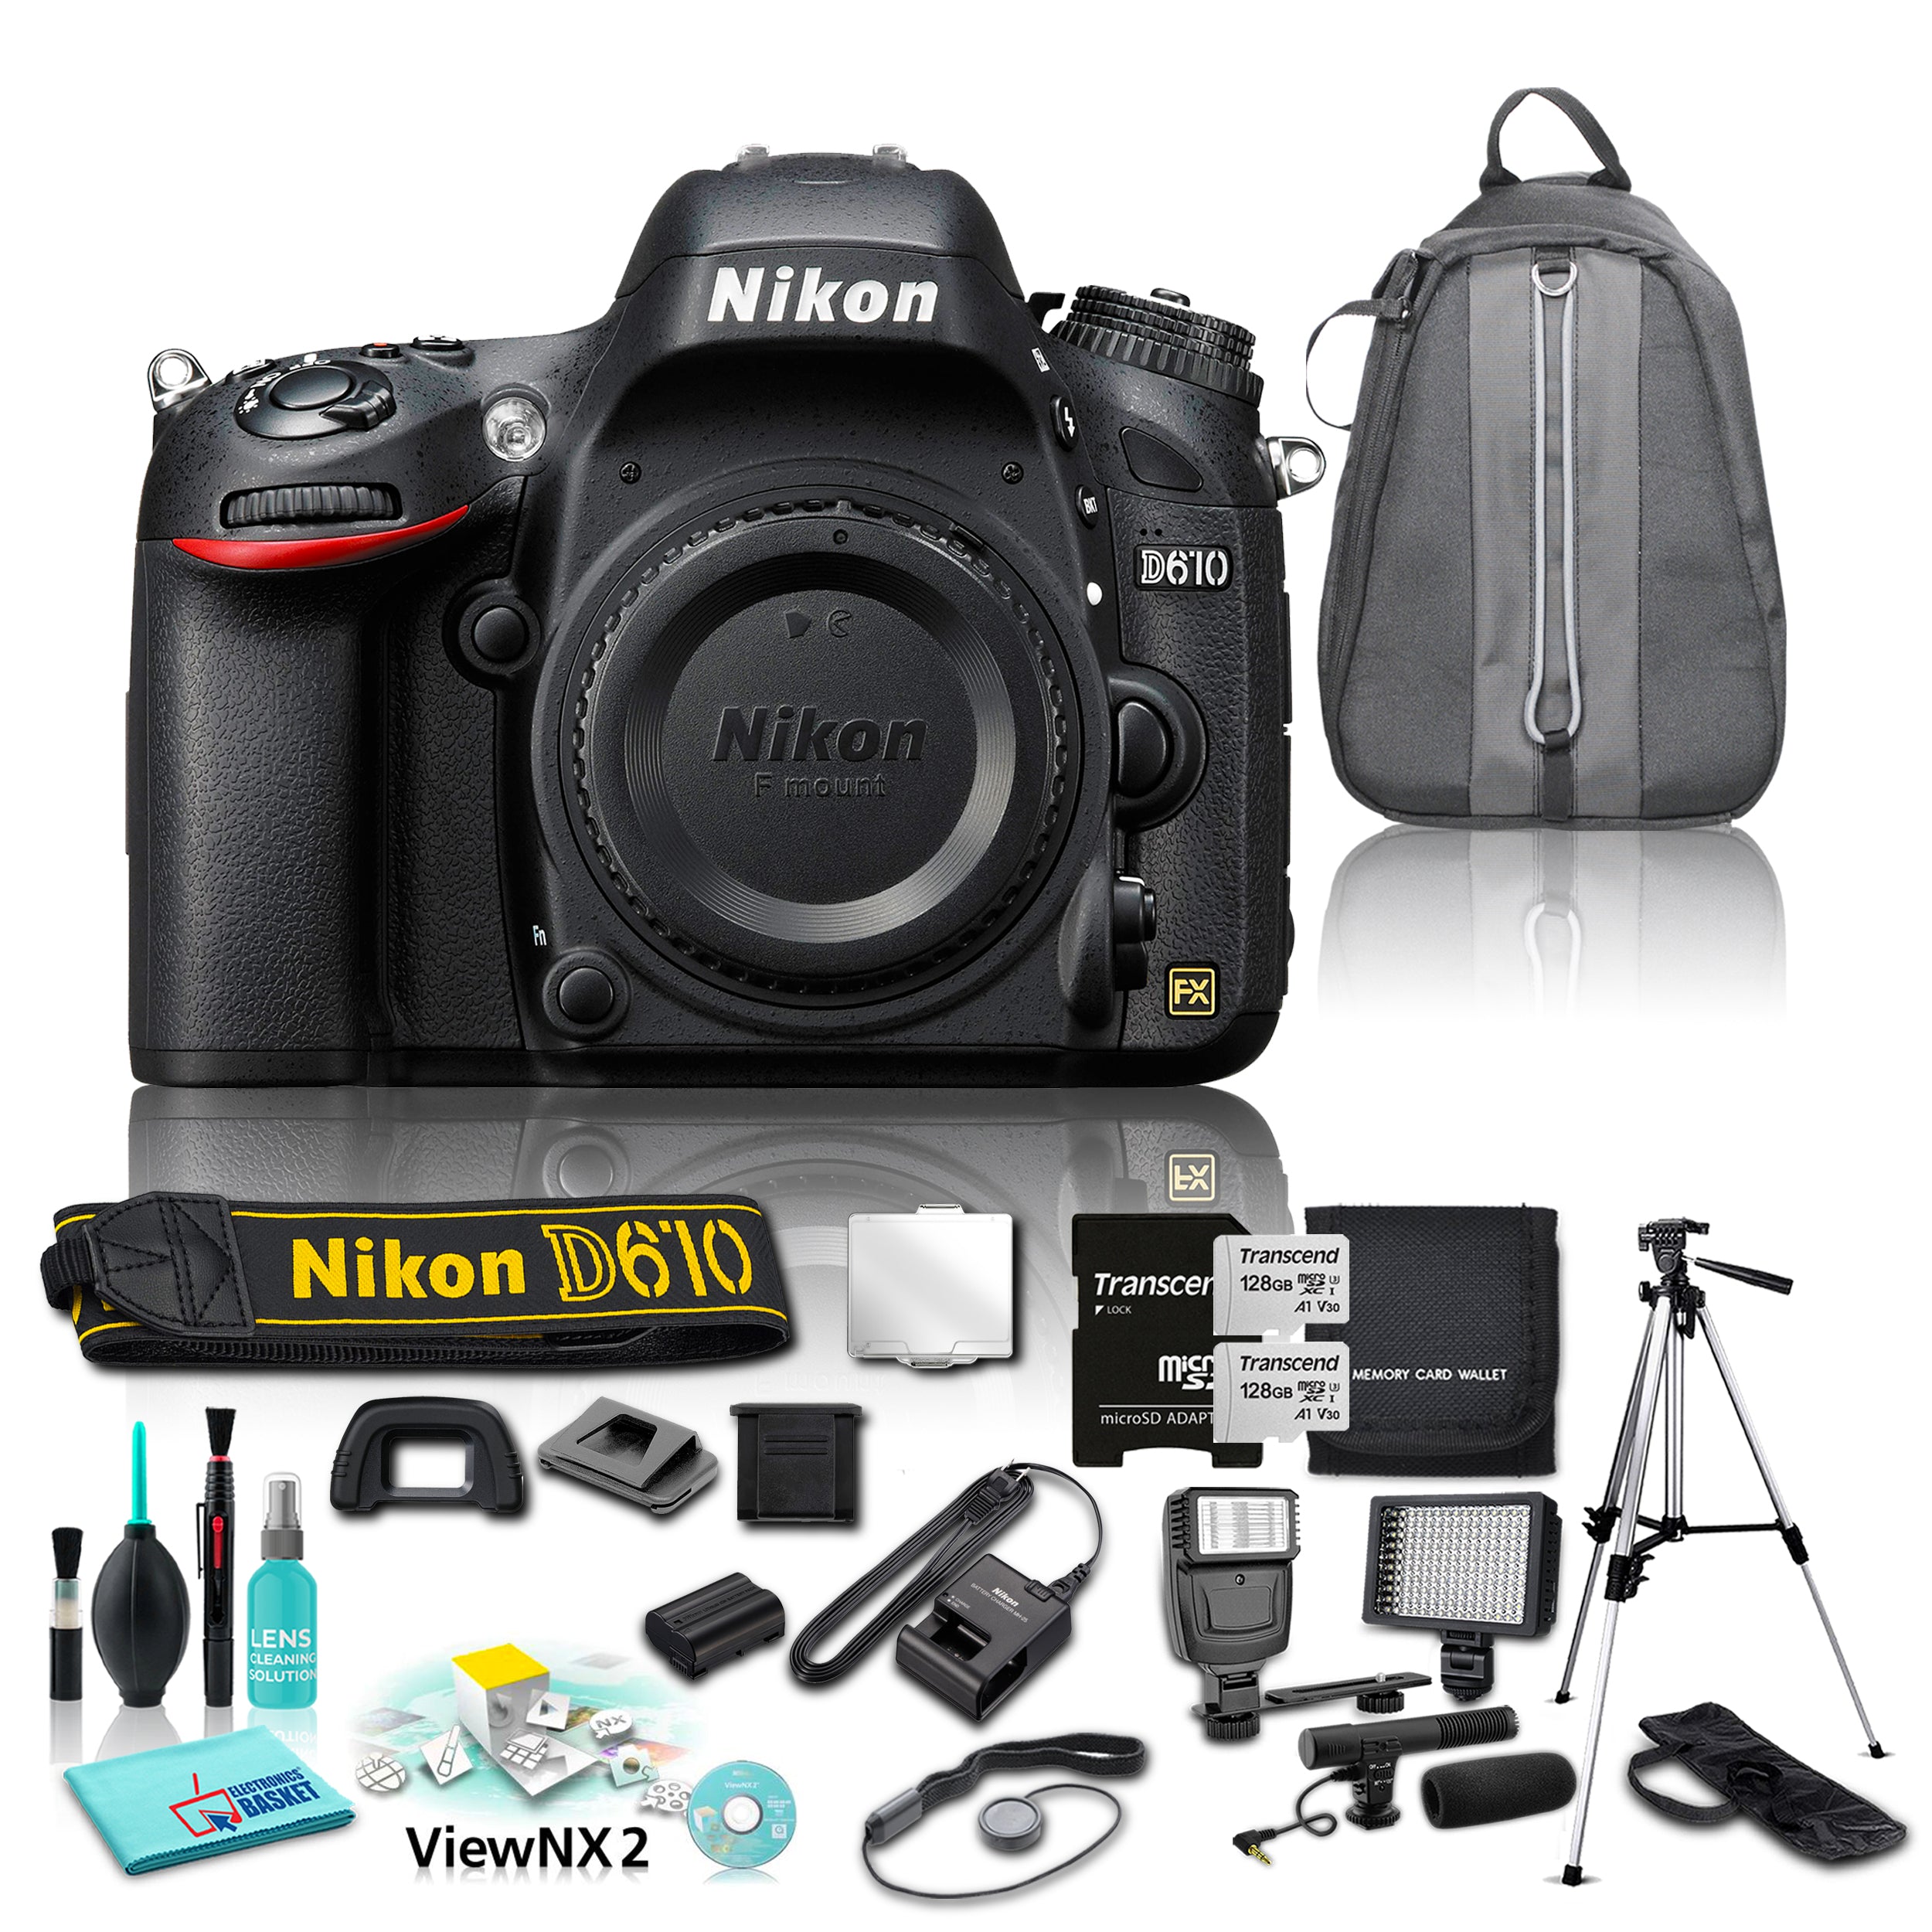 Nikon D610 24.3MP Full HD 1080p Recording DSLR Camera and 13 Piece Accessories Combo Bundle - Body Only